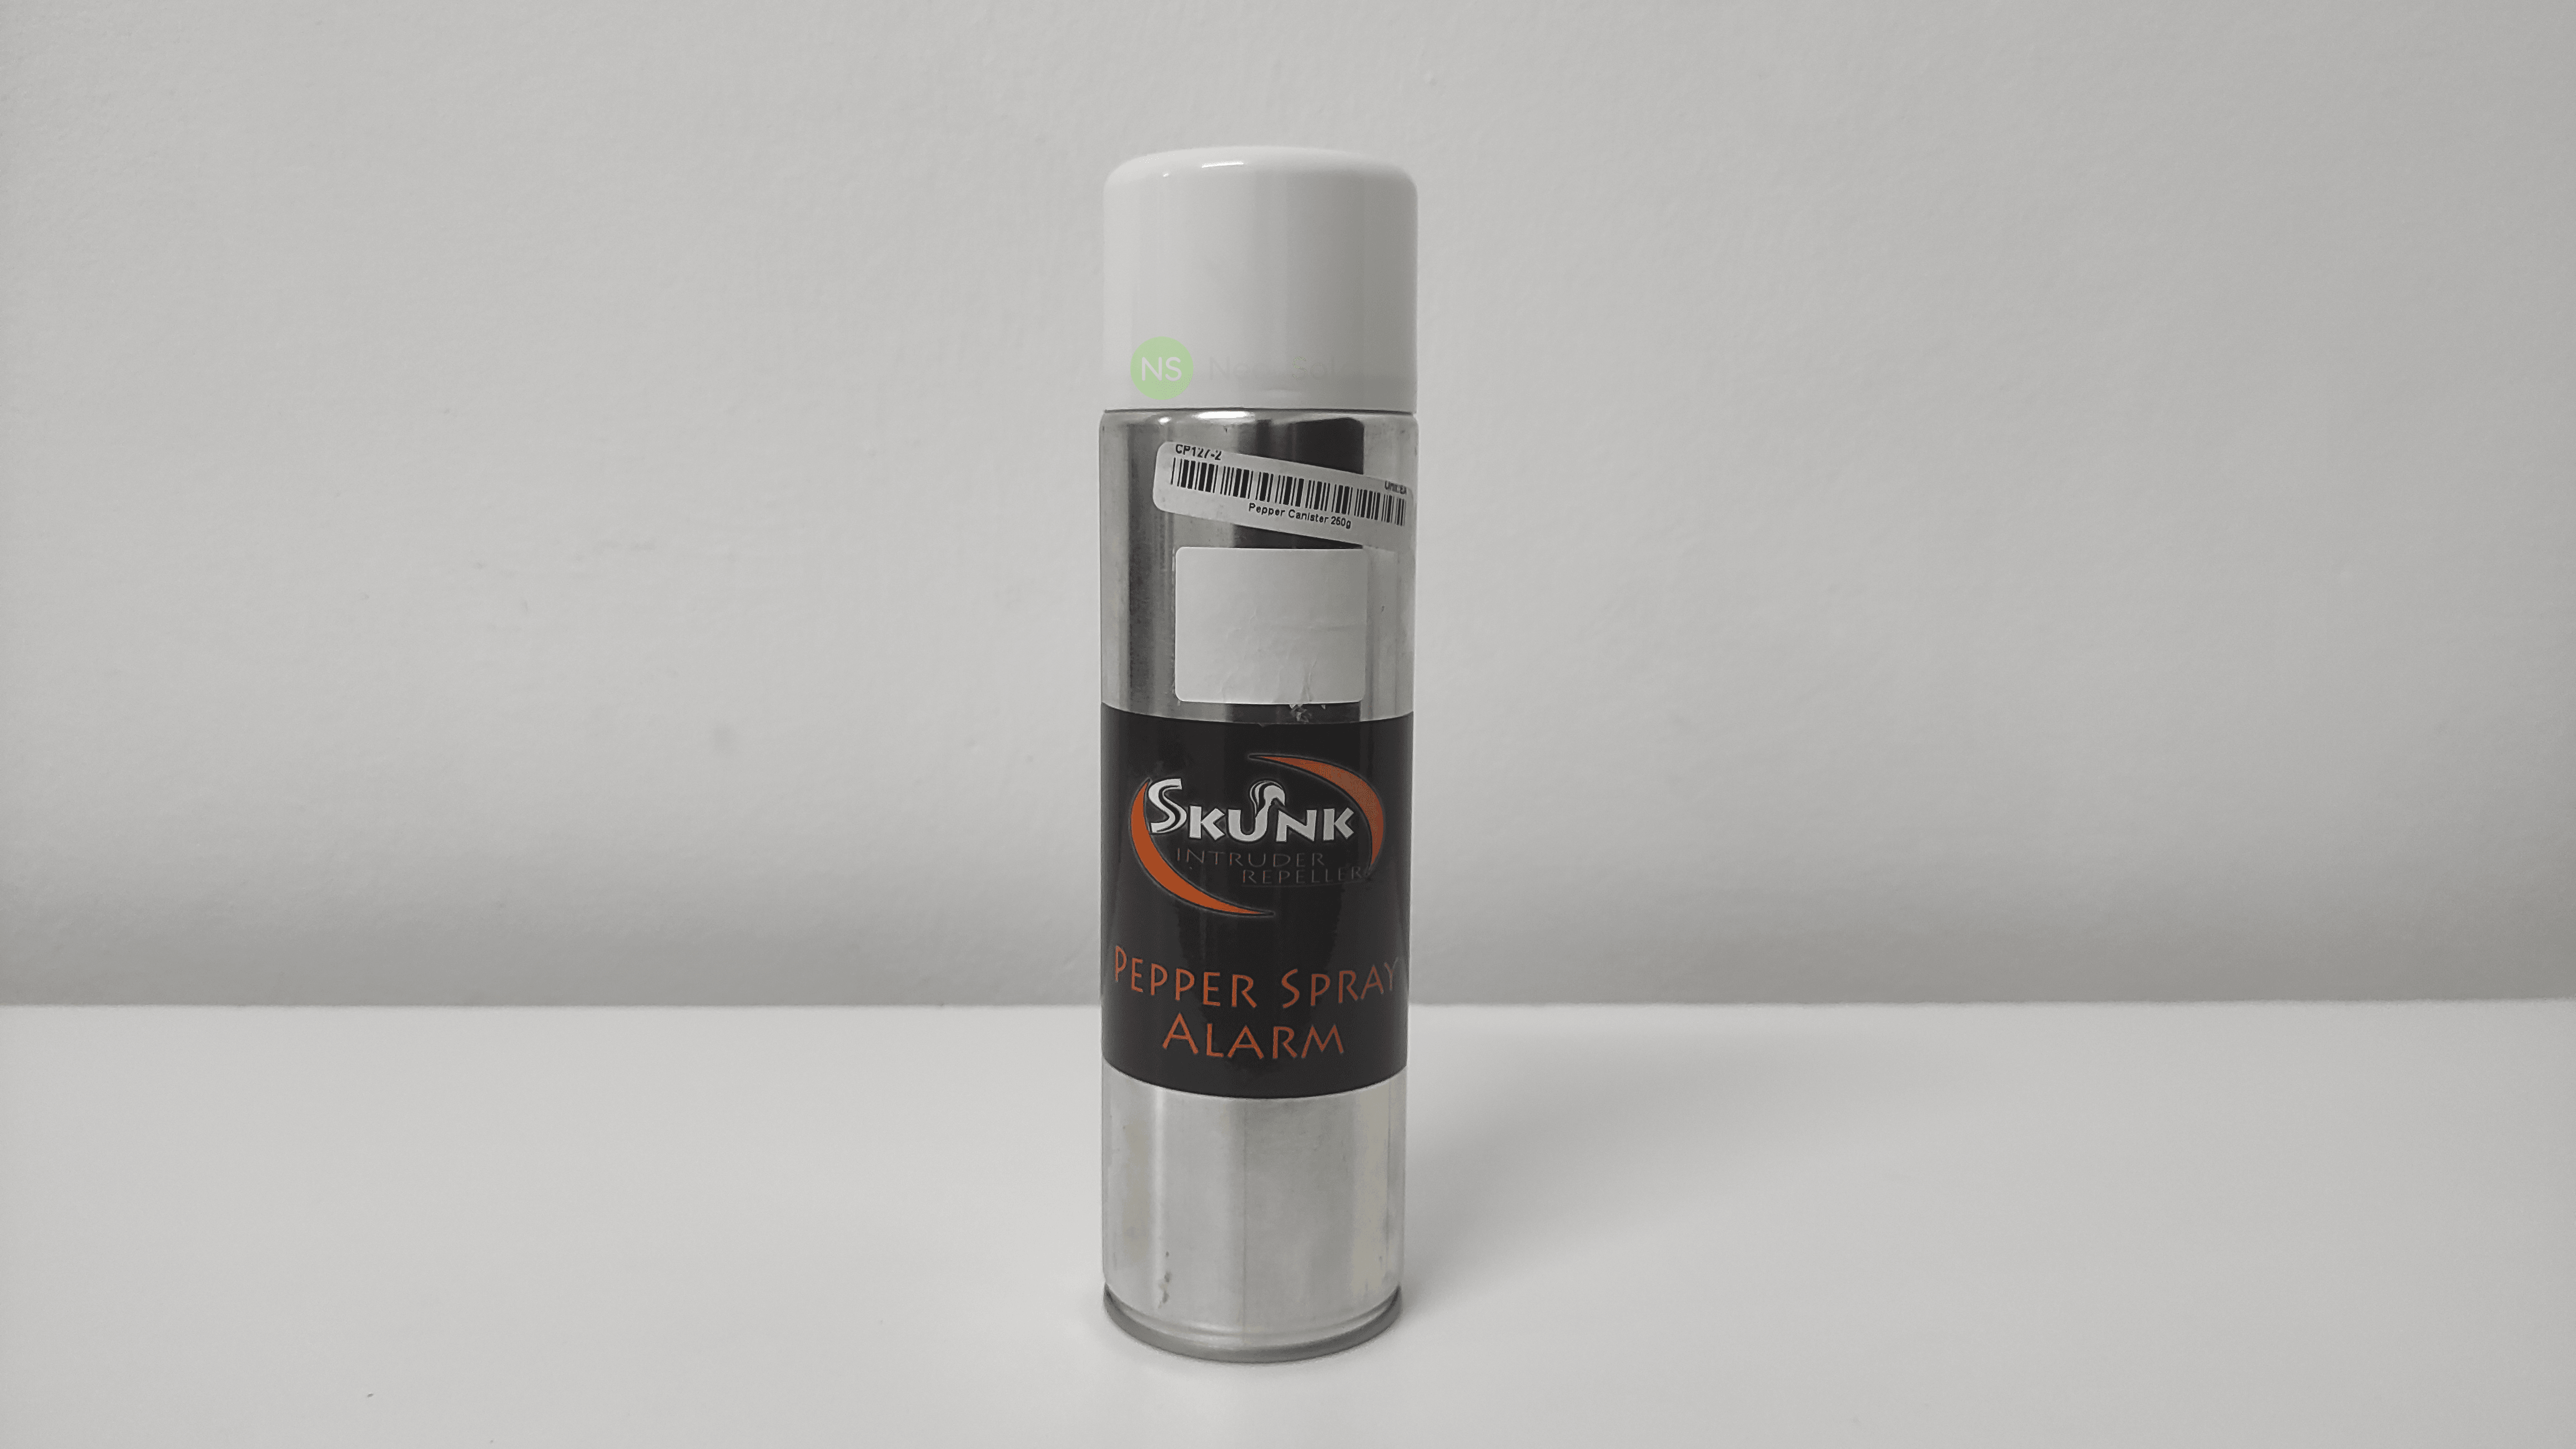 SKUNK PEPPER GAS CANISTER 425ML - NeonSales South Africa